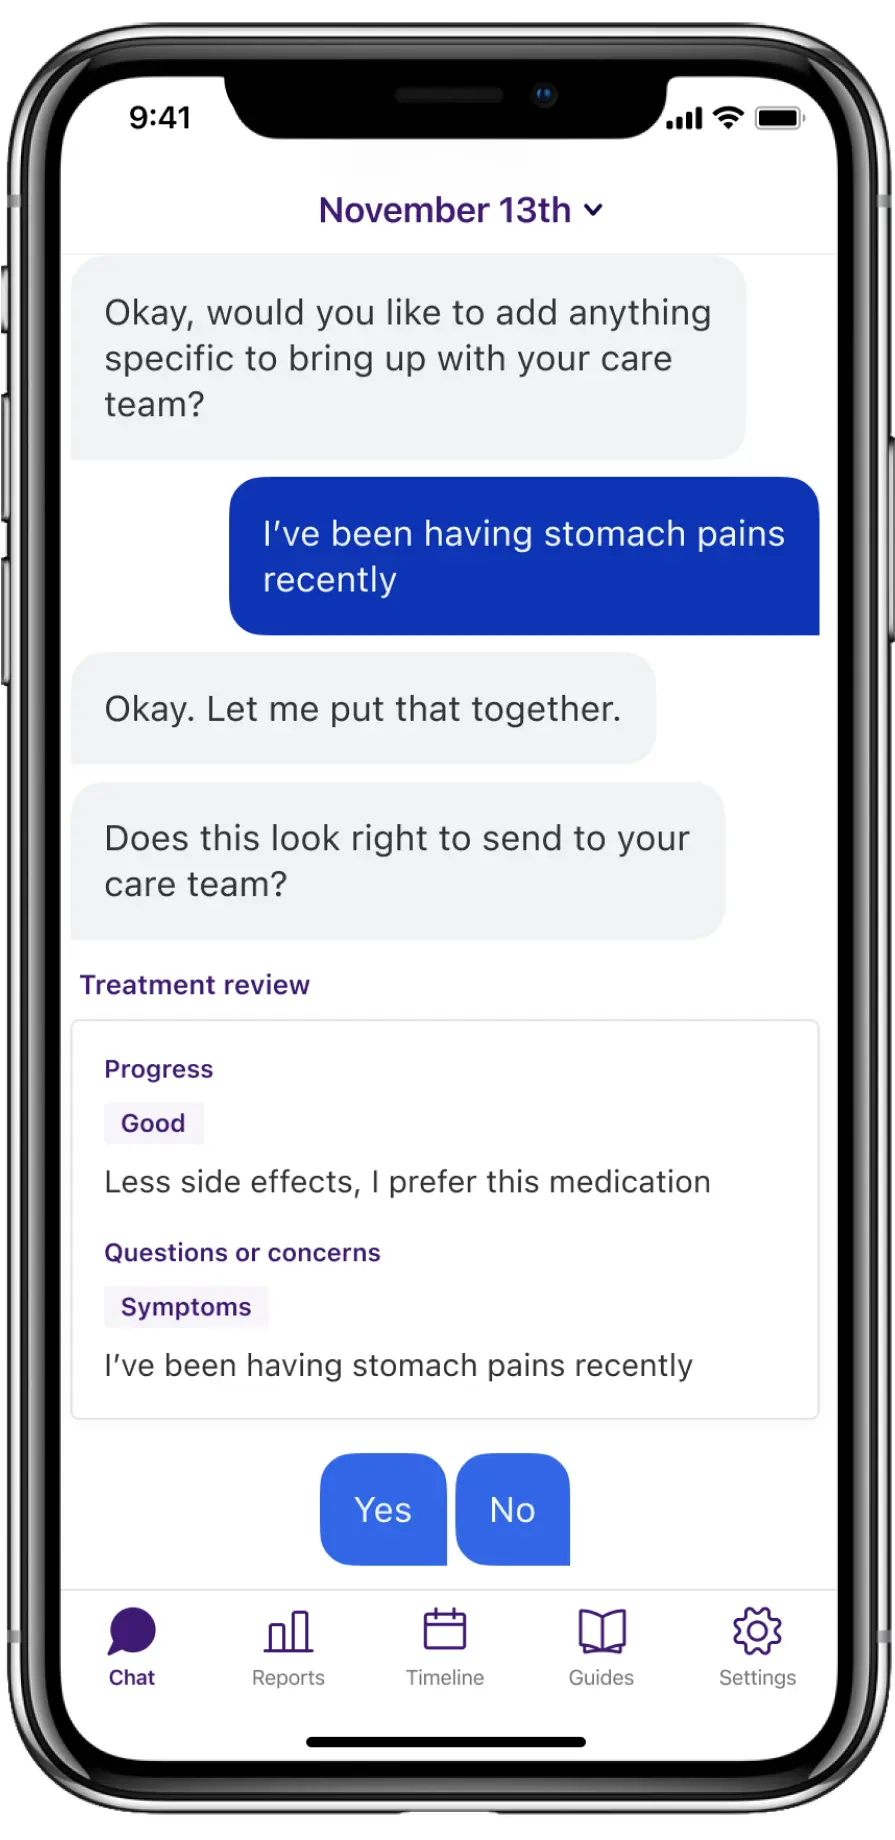 Demo view of the Fora Health app on an iPhone